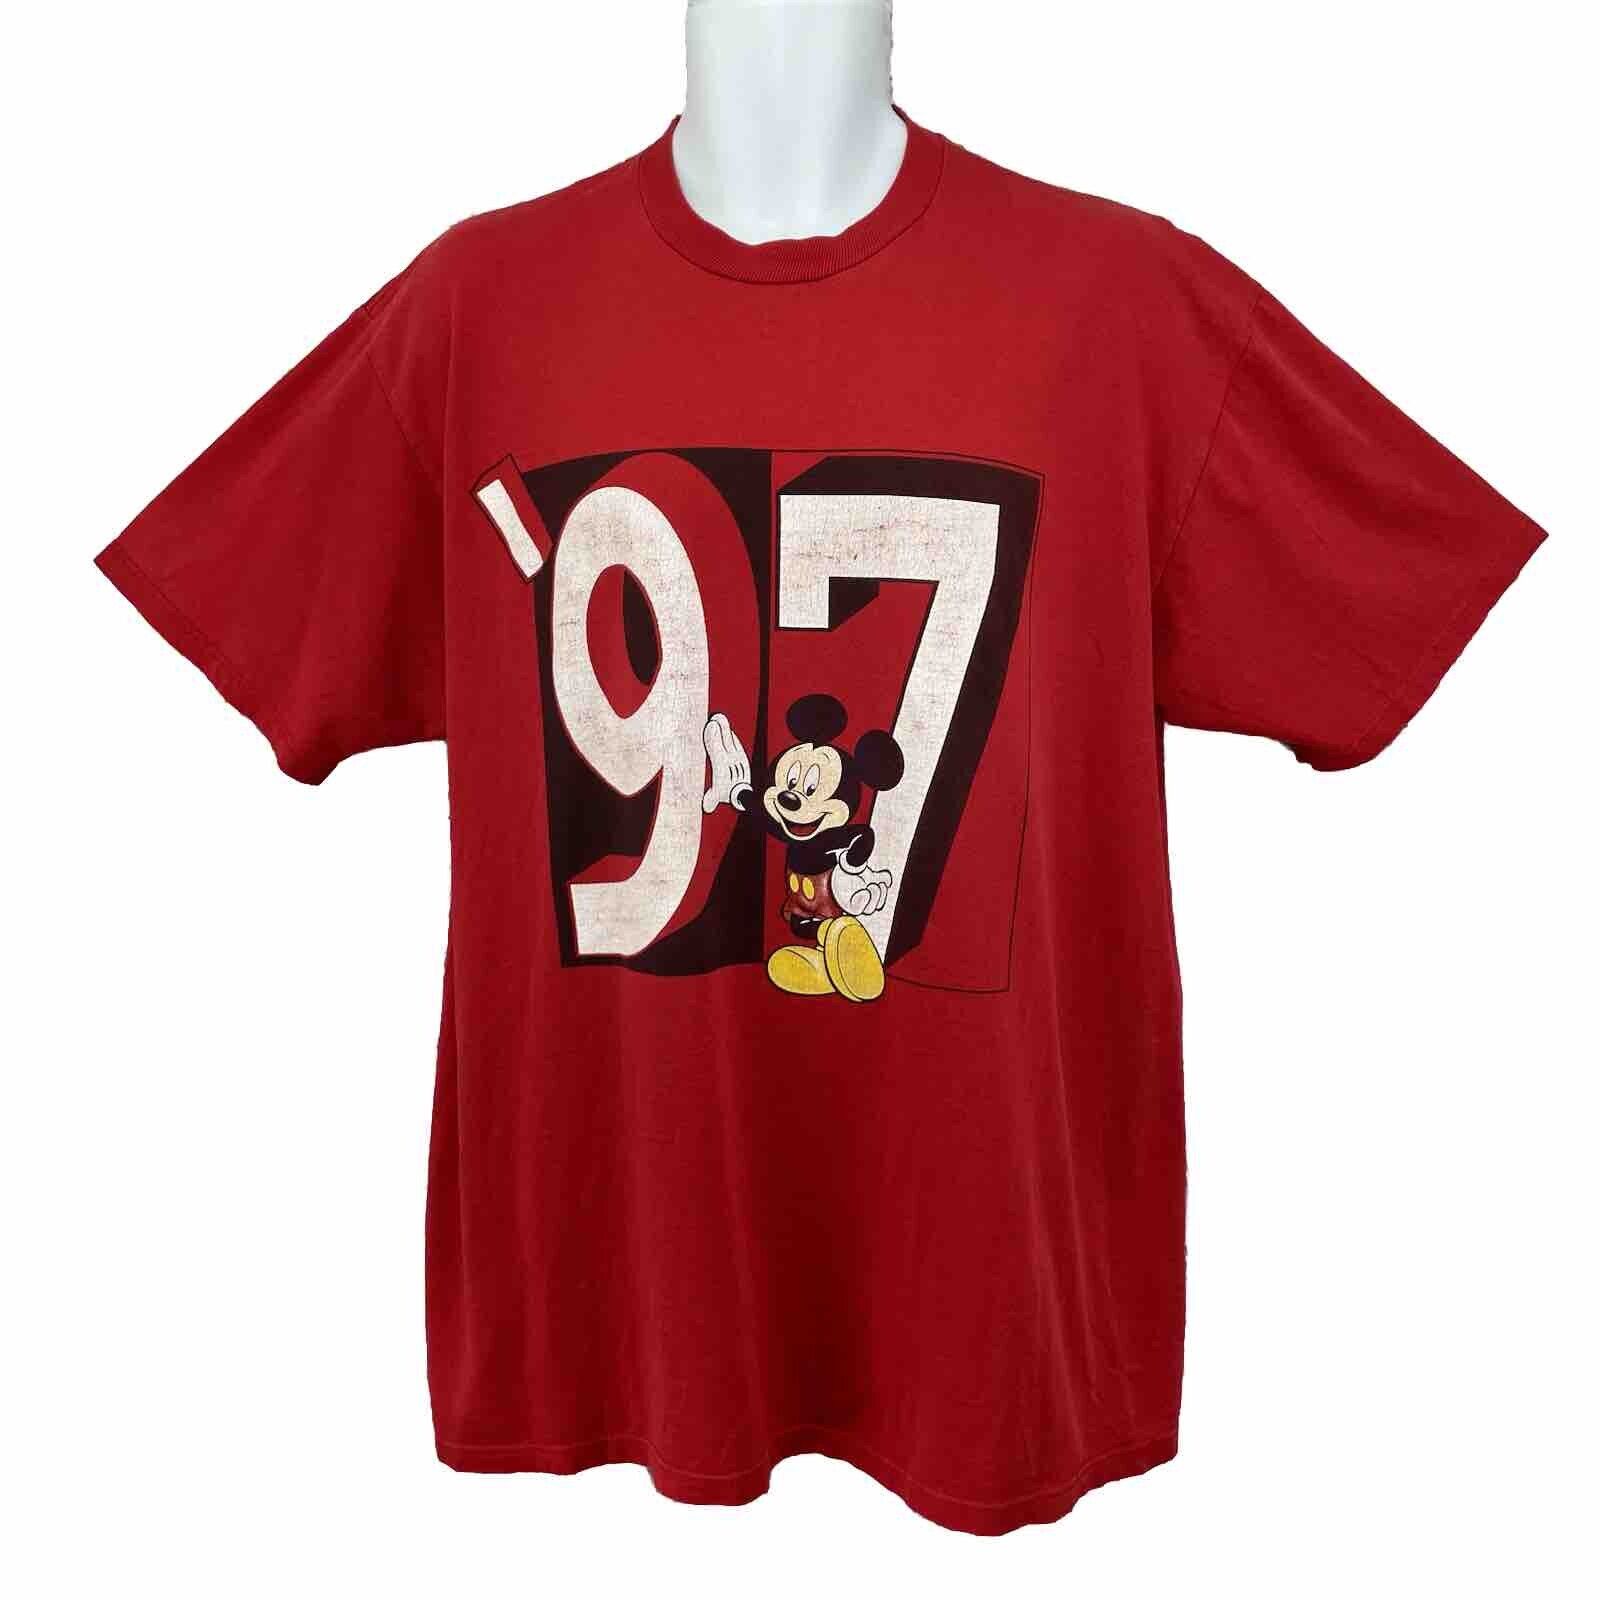 Vintage Disney World 1997 T Shirt/ Men’s (XL) Red Mickey Inc. Made In USA